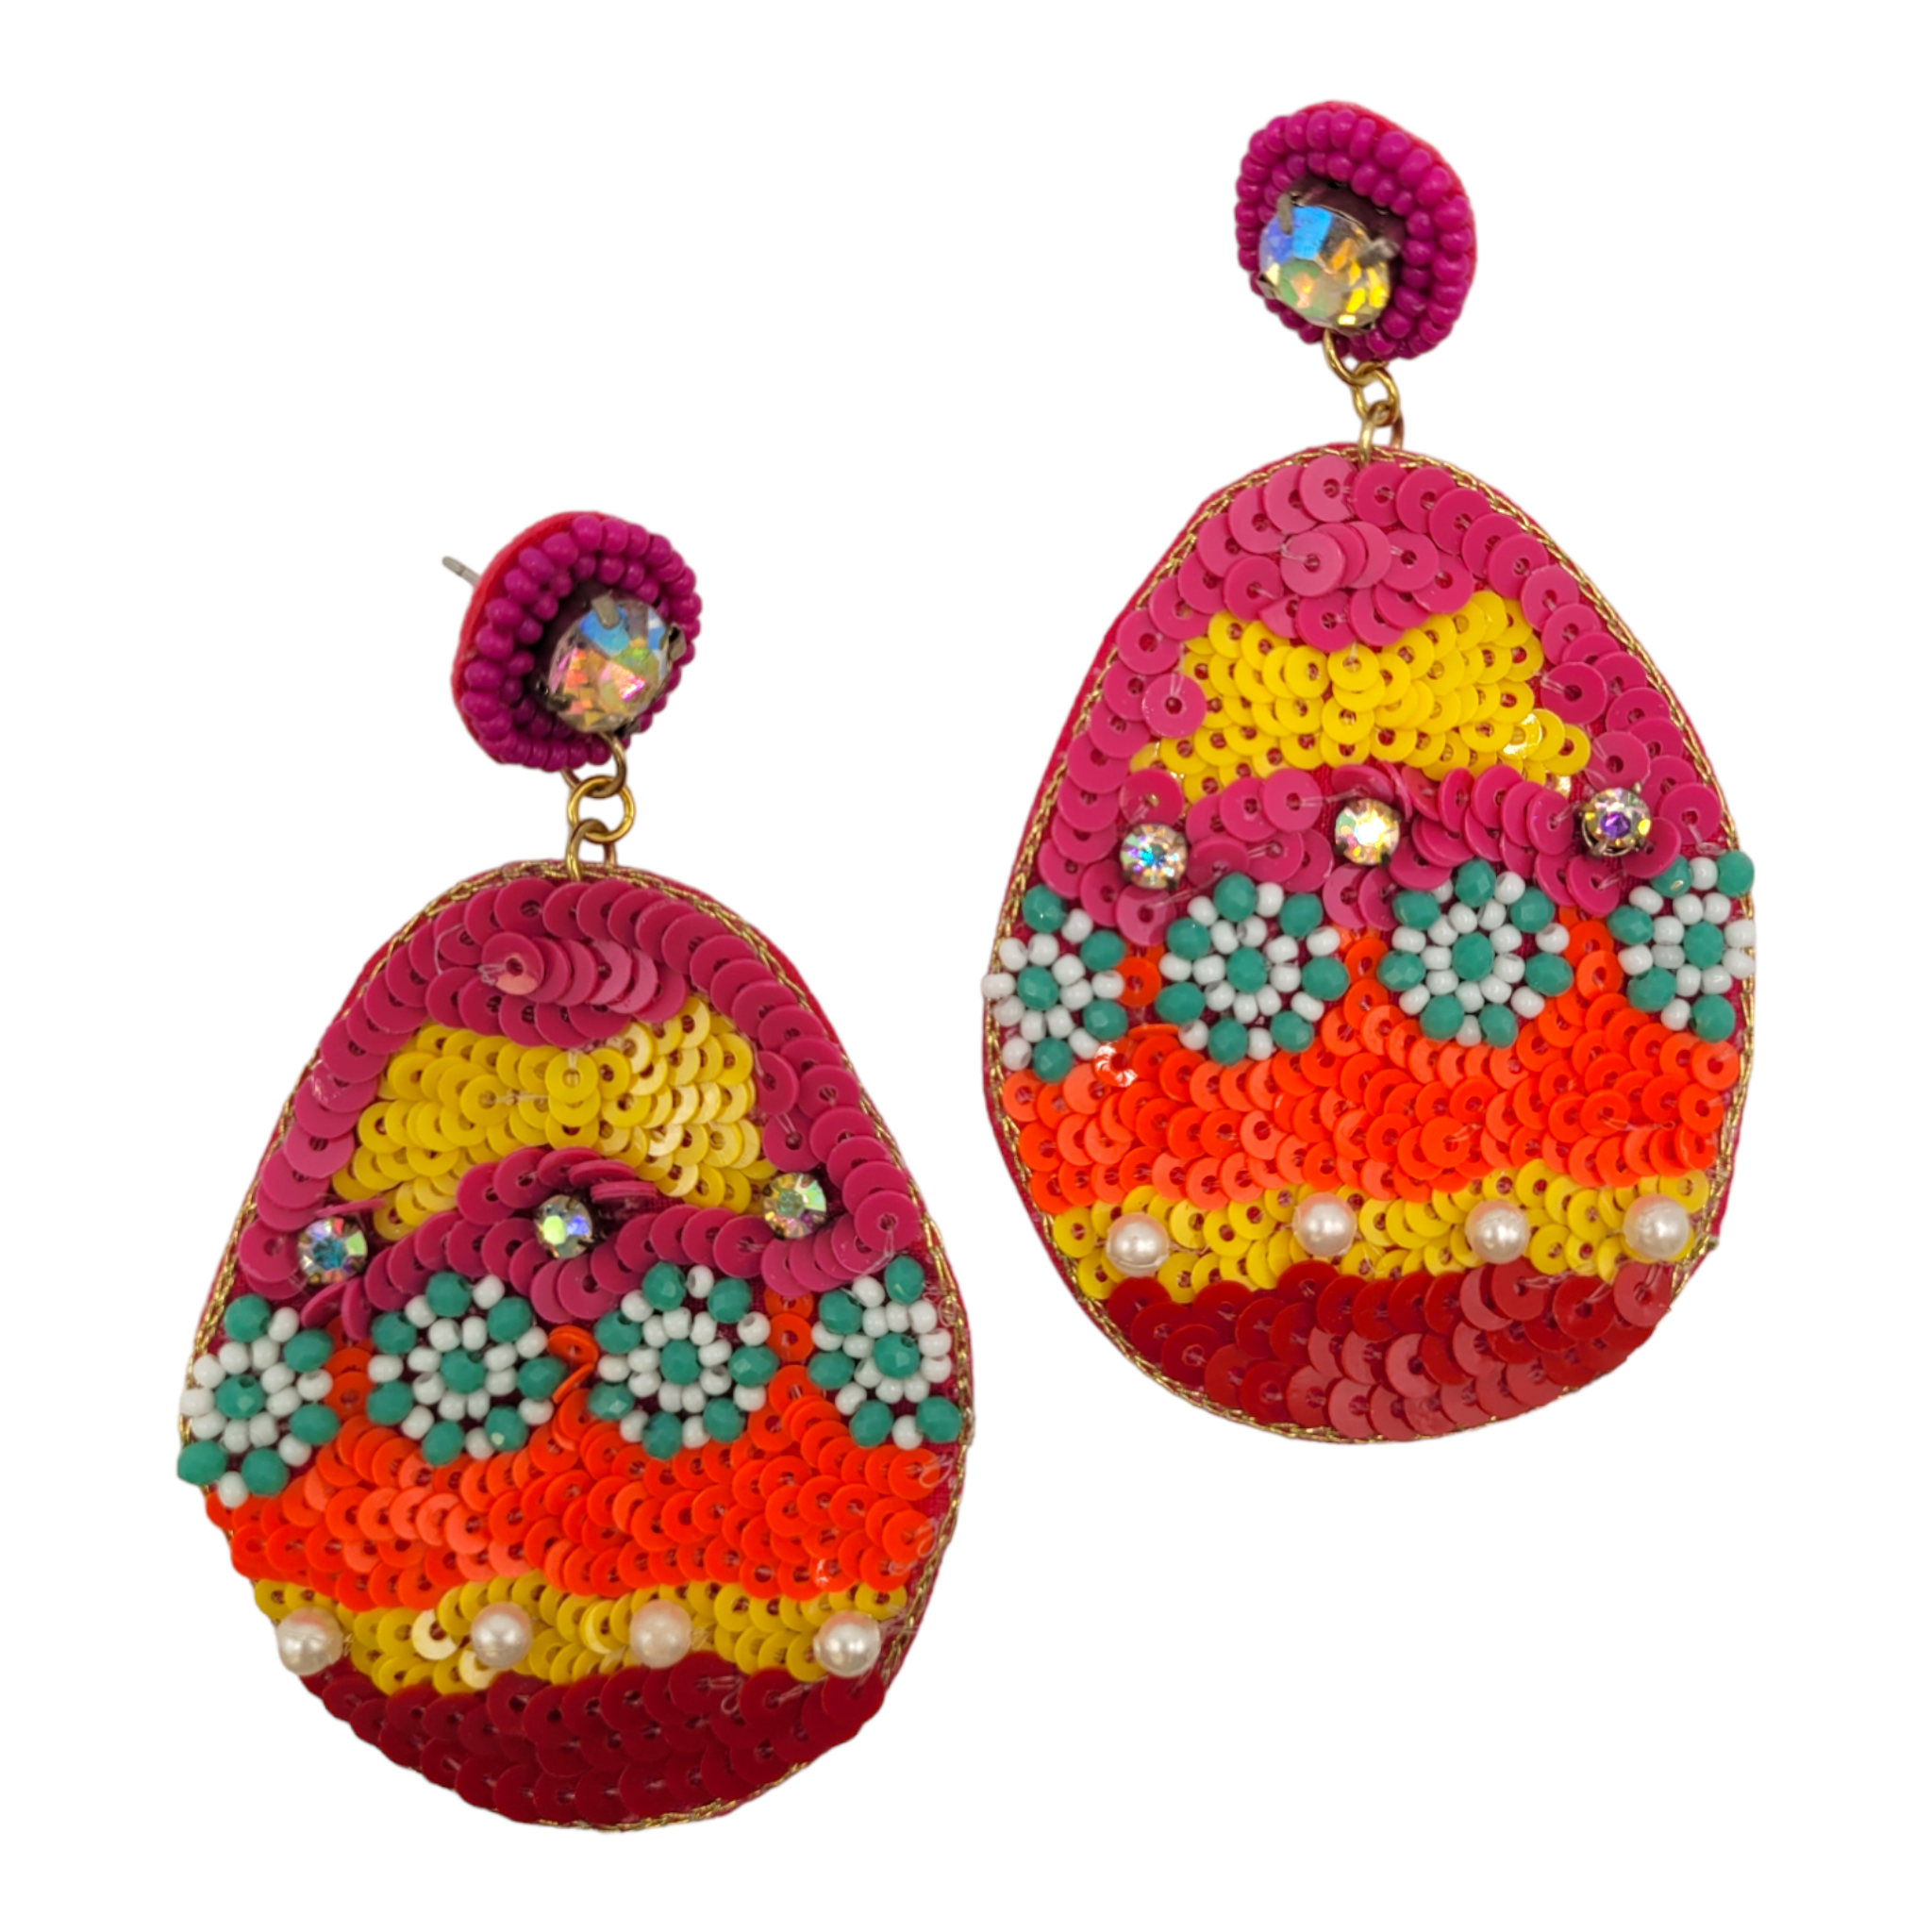 Fuchsia Easter Egg Beaded Earrings-Earrings-LouisGeorge Boutique-LouisGeorge Boutique, Women’s Fashion Boutique Located in Trussville, Alabama